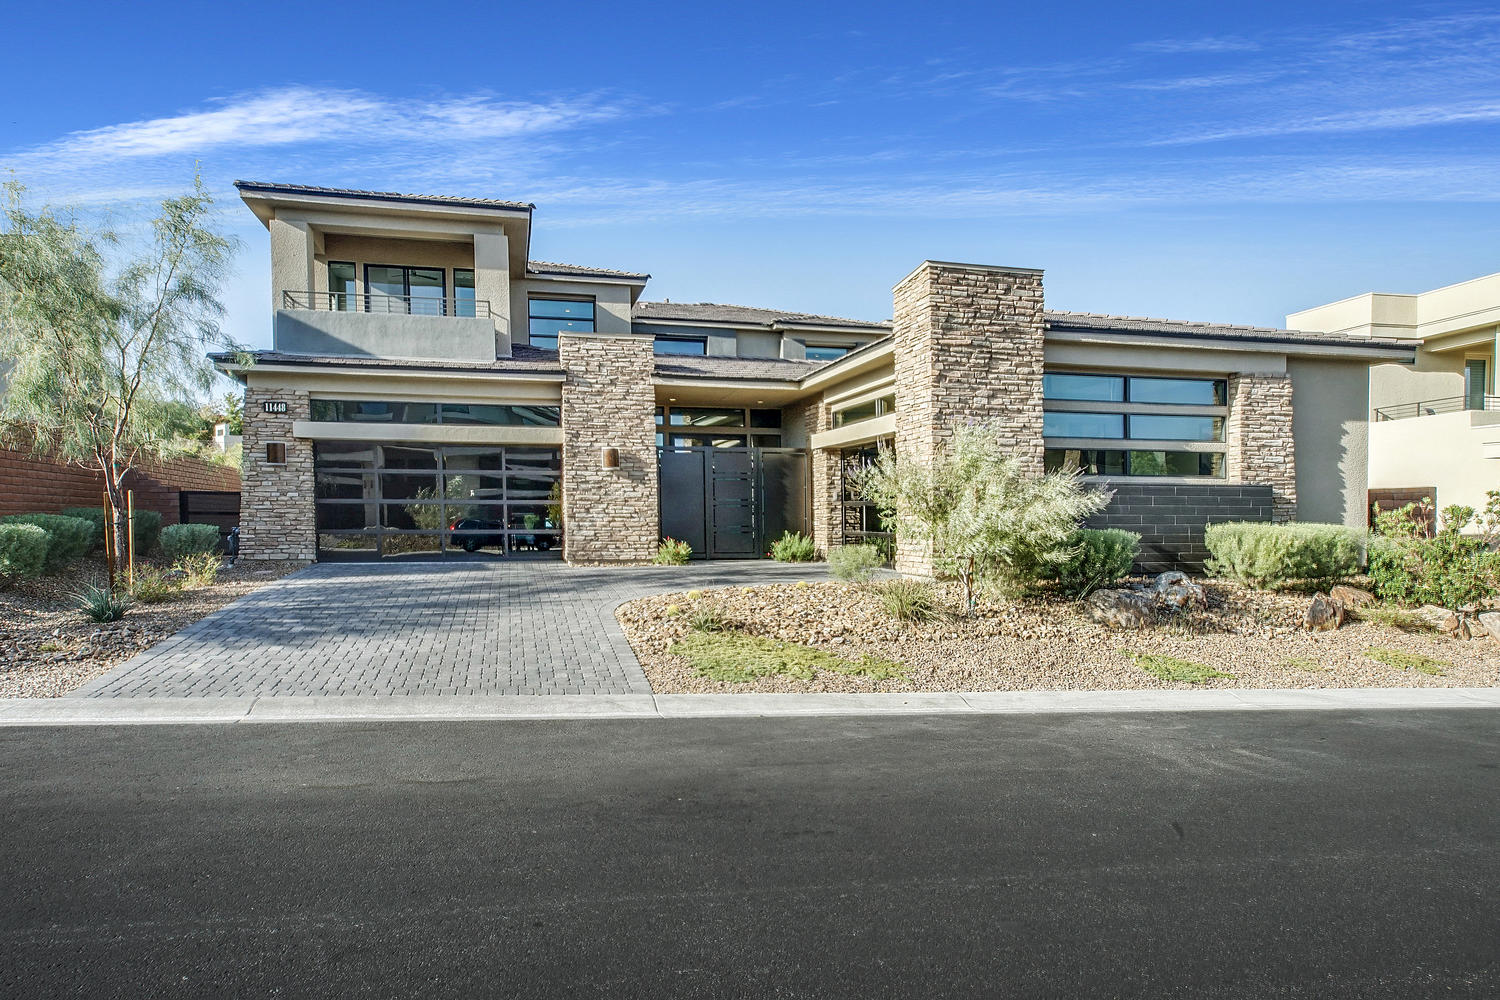 11448 Opal Springs Las Vegas, Nevada 89135 - $1,900,000 home for sale, house images, photos and pics gallery